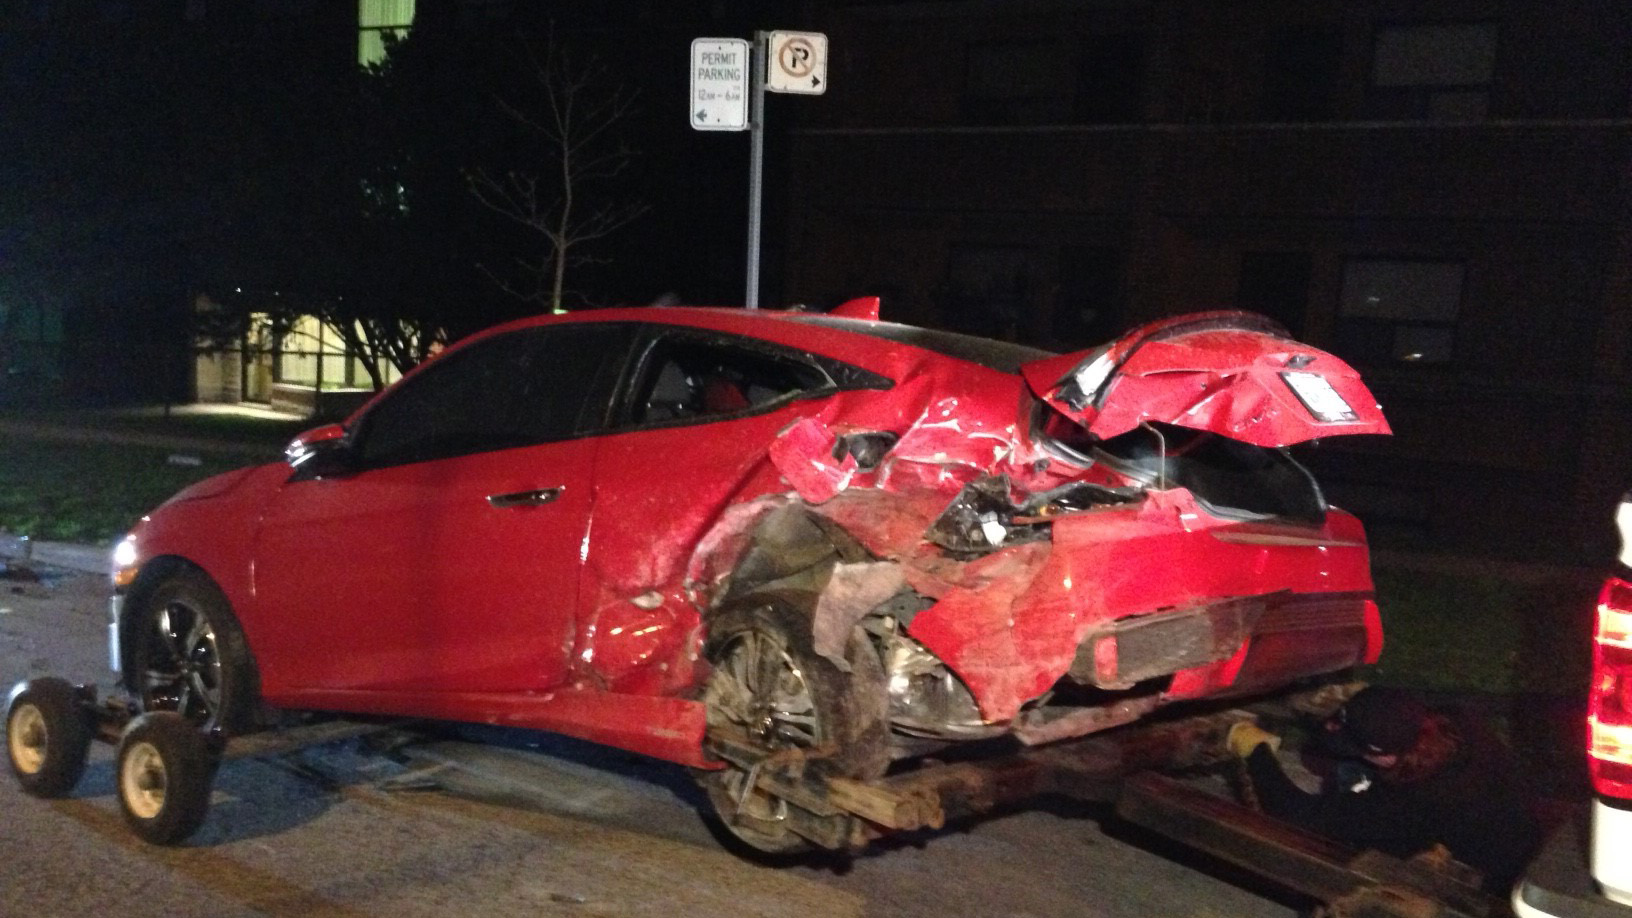 Driver facing impaired charges after hitting two parked cars in ... - CityNews